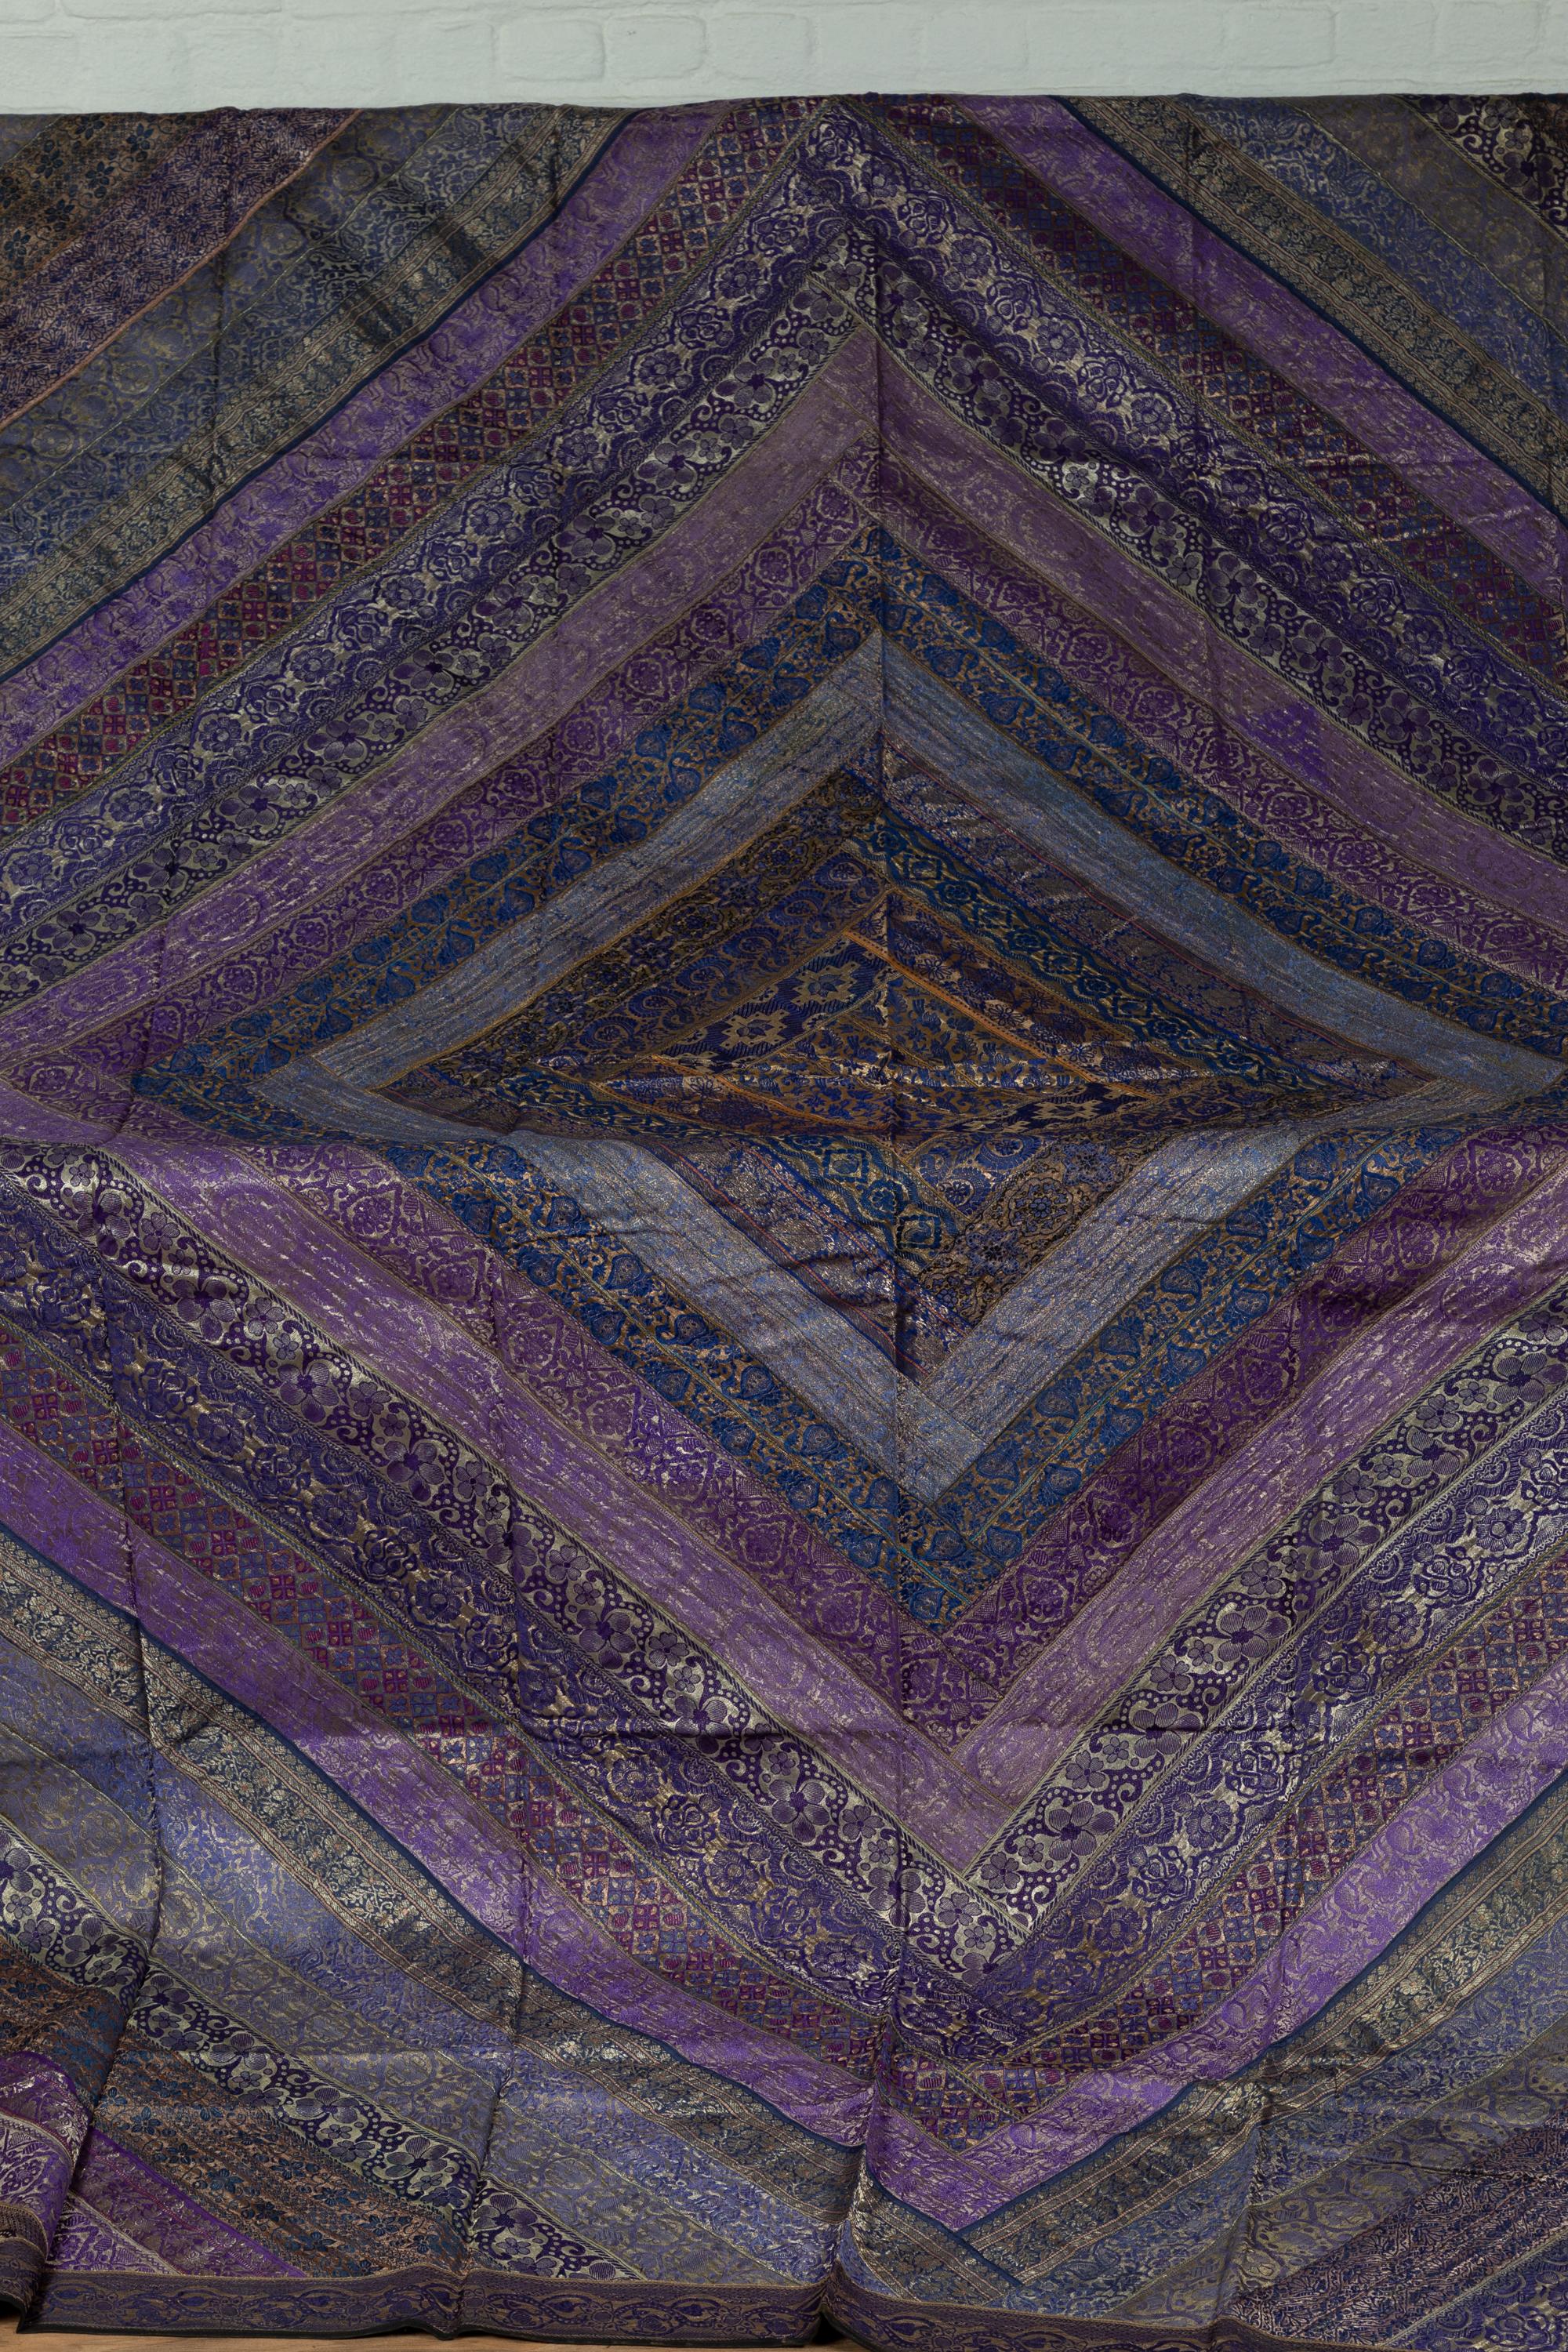 20th Century Vintage Indian Silk Embroidered Fabric with Purple, Silver and Gold Tones